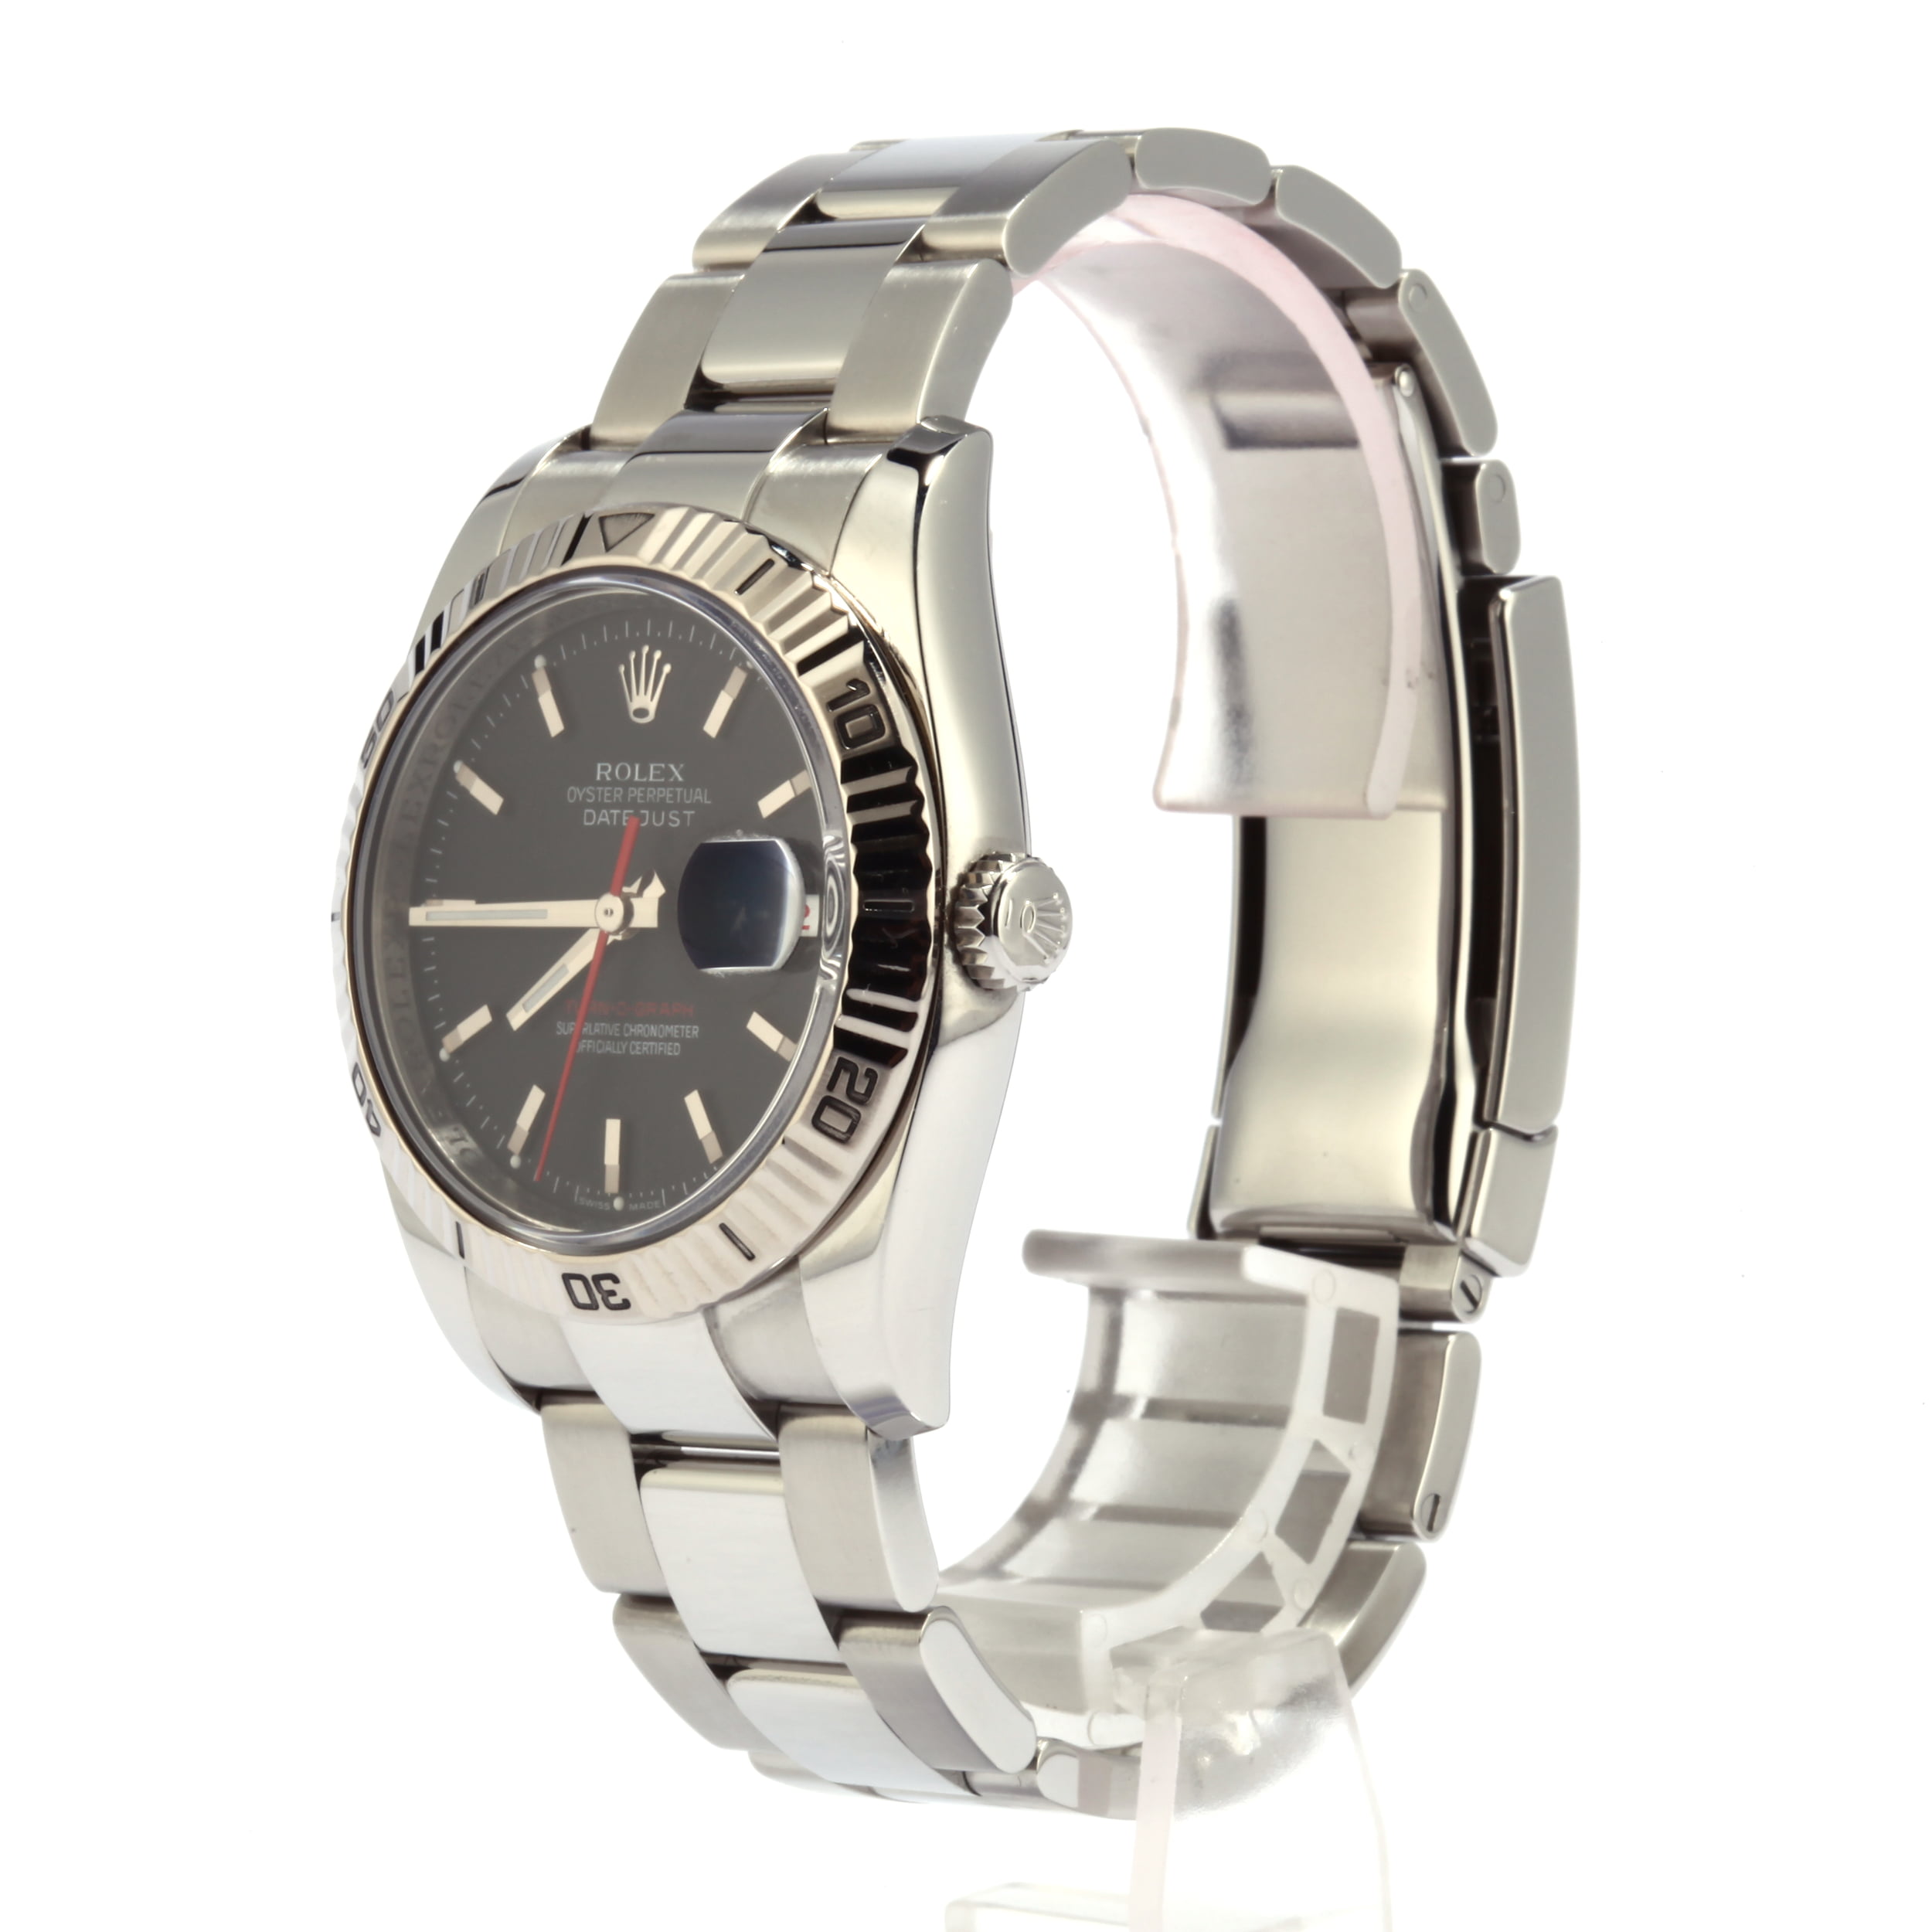 Pre-Owned Rolex Datejust Turn-O-Graph 116264 Black Dial T